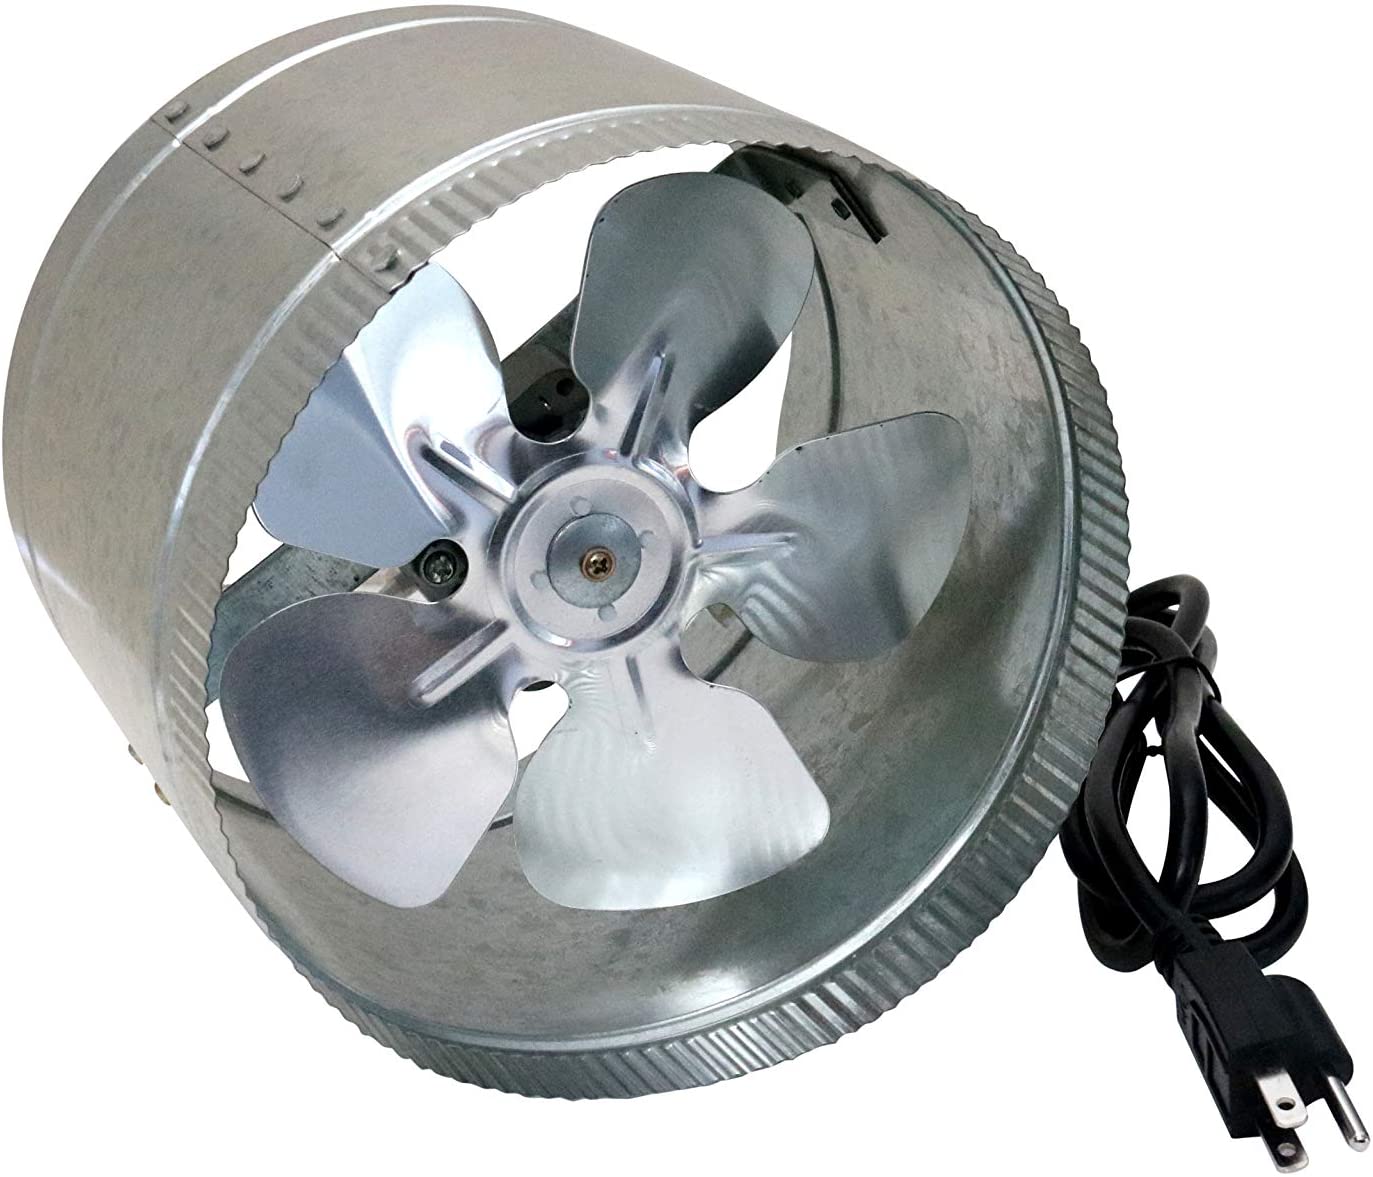 SunStream Duct Booster Fan, Extreme Low Noise